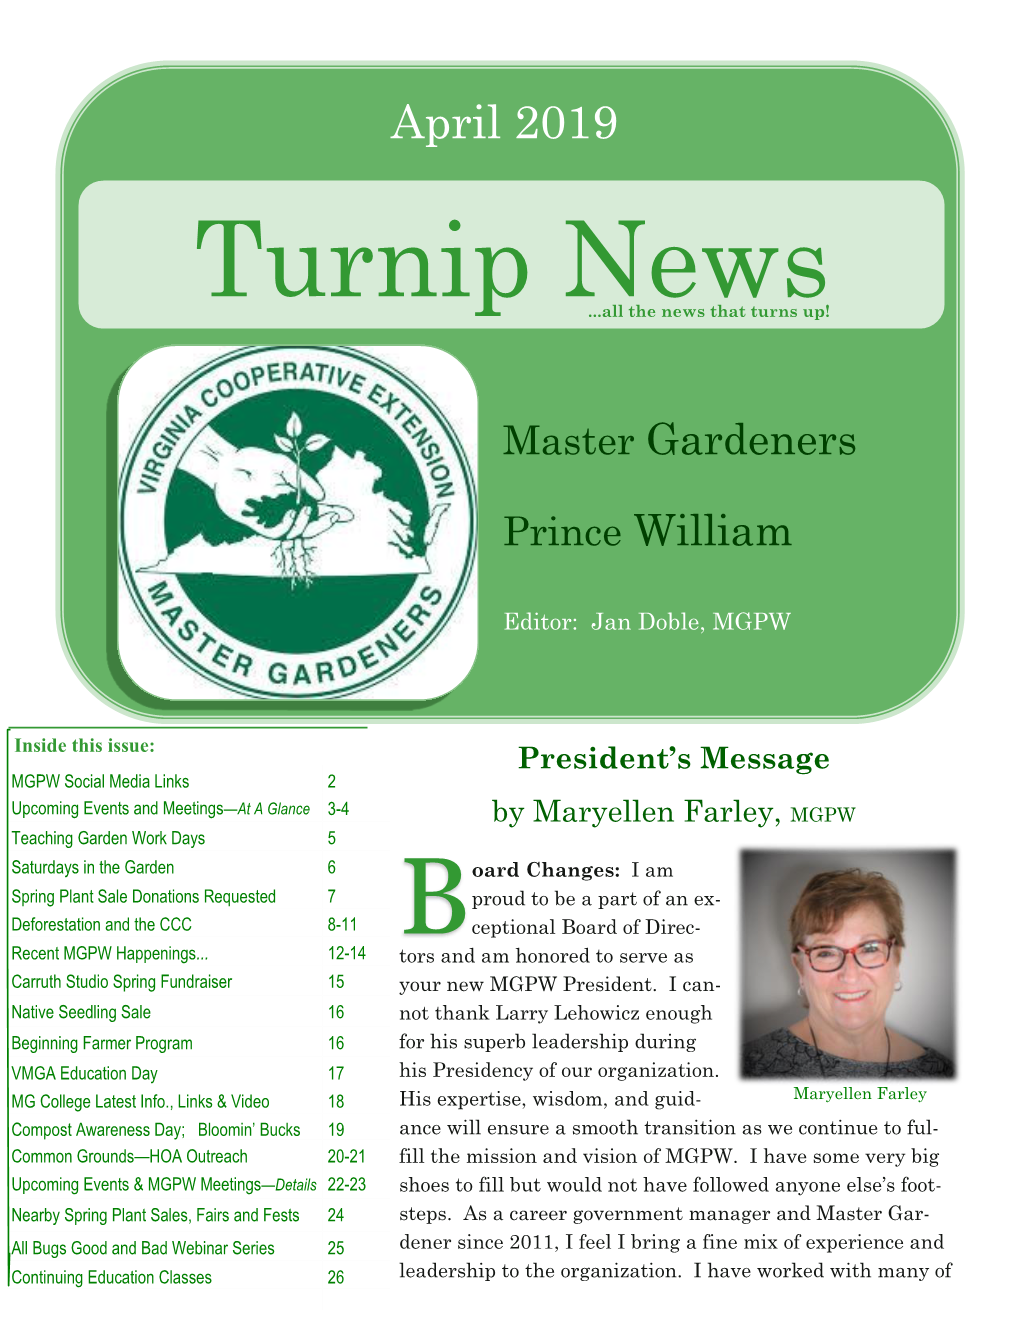 Turnip News ...All the News That Turns Up!